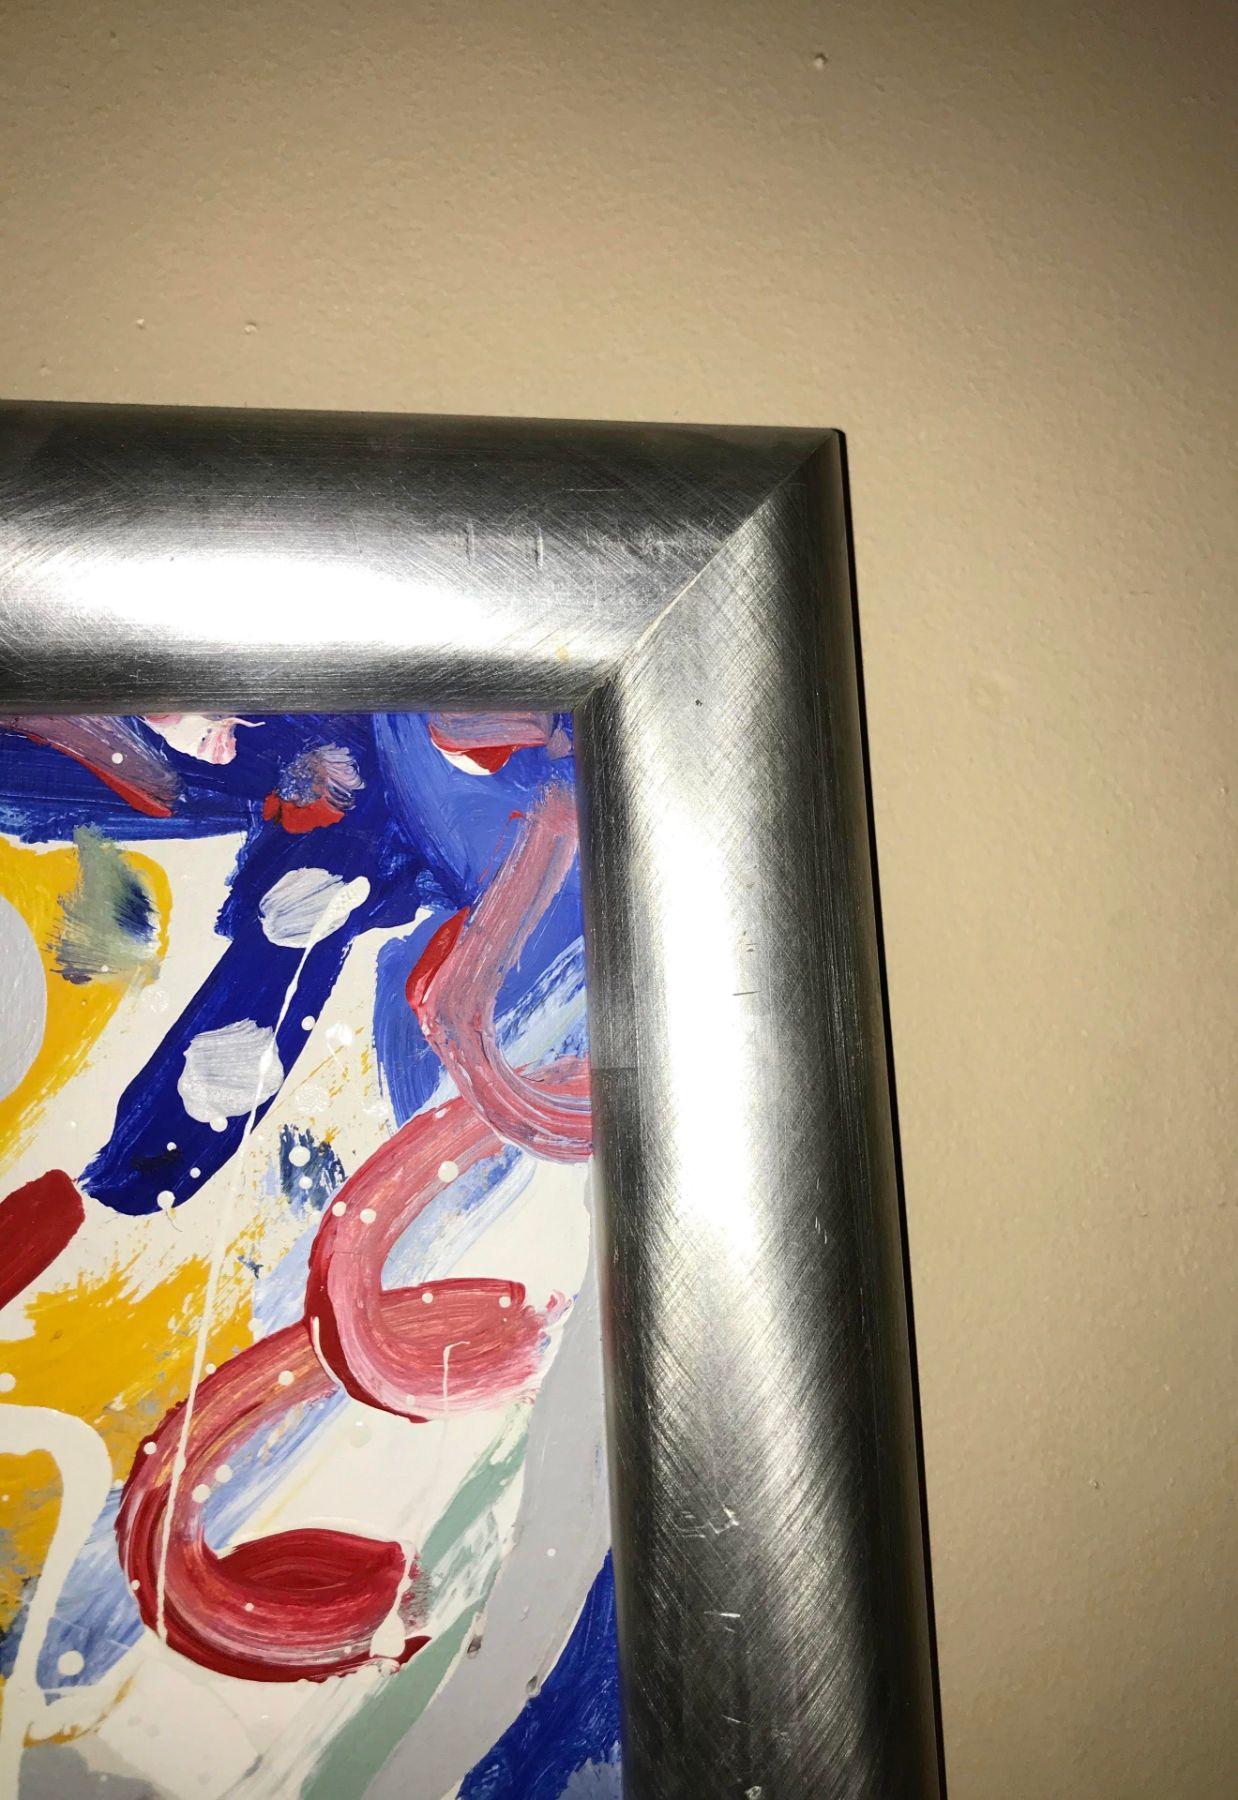 Arts and Crafts Abstract Oil on Canvas Painting by Colow B. Dated 1984 For Sale